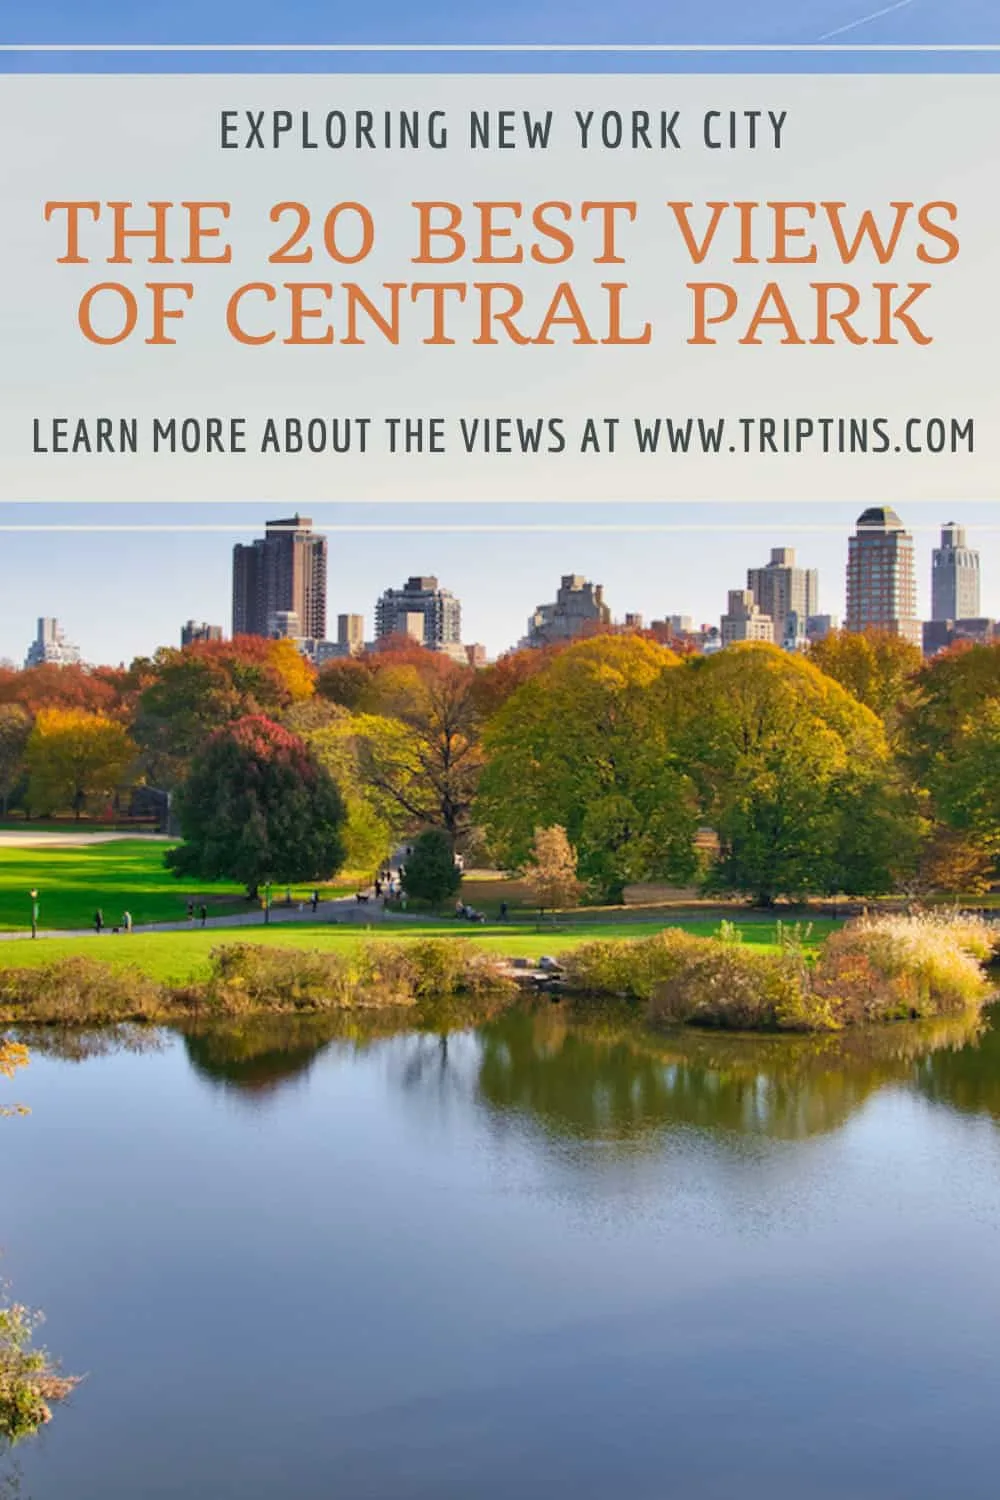 Views in Central Park